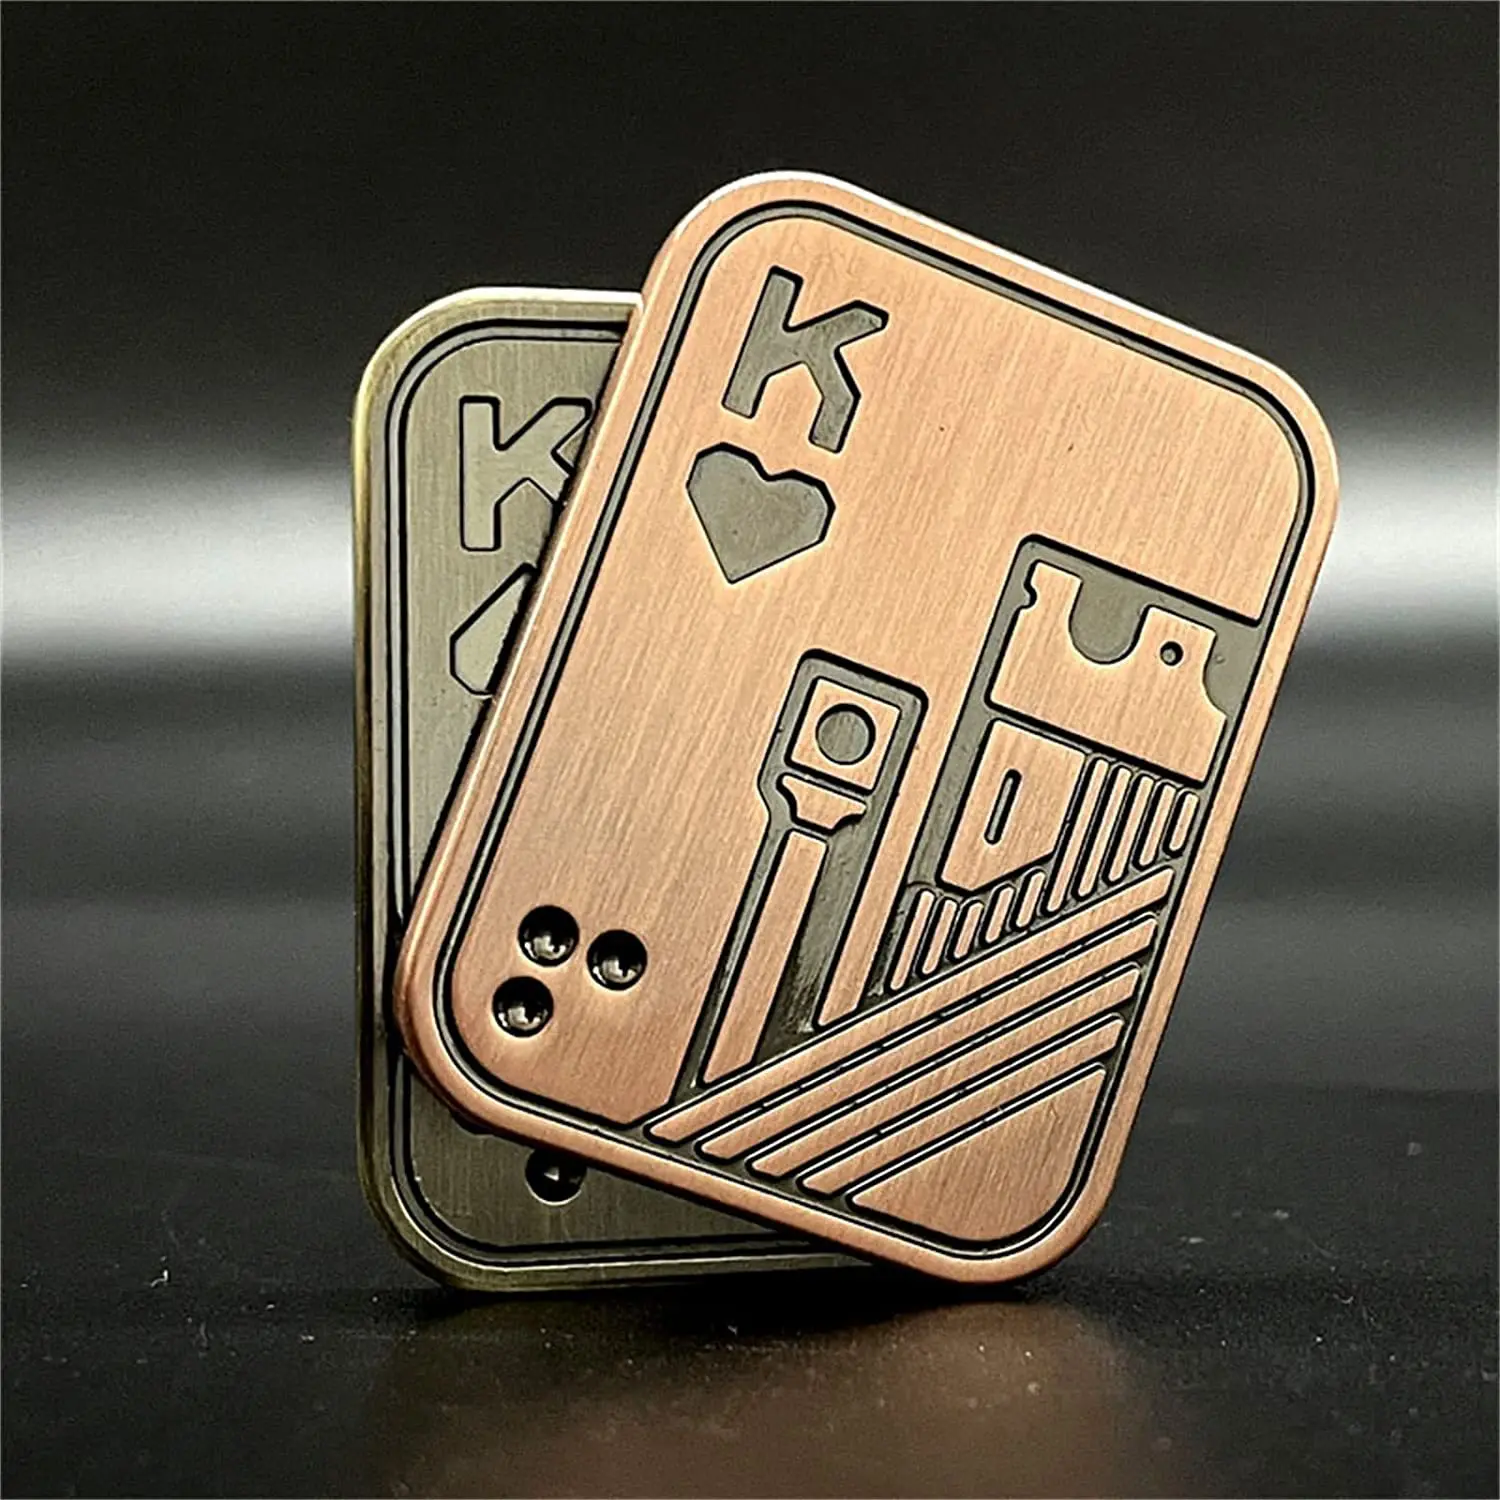 

New Aa Kk Metal Poker Push Card Toys Novelt Fidget Toys Spinning Top Decompression Toy Office Stress Relief Toy Gift